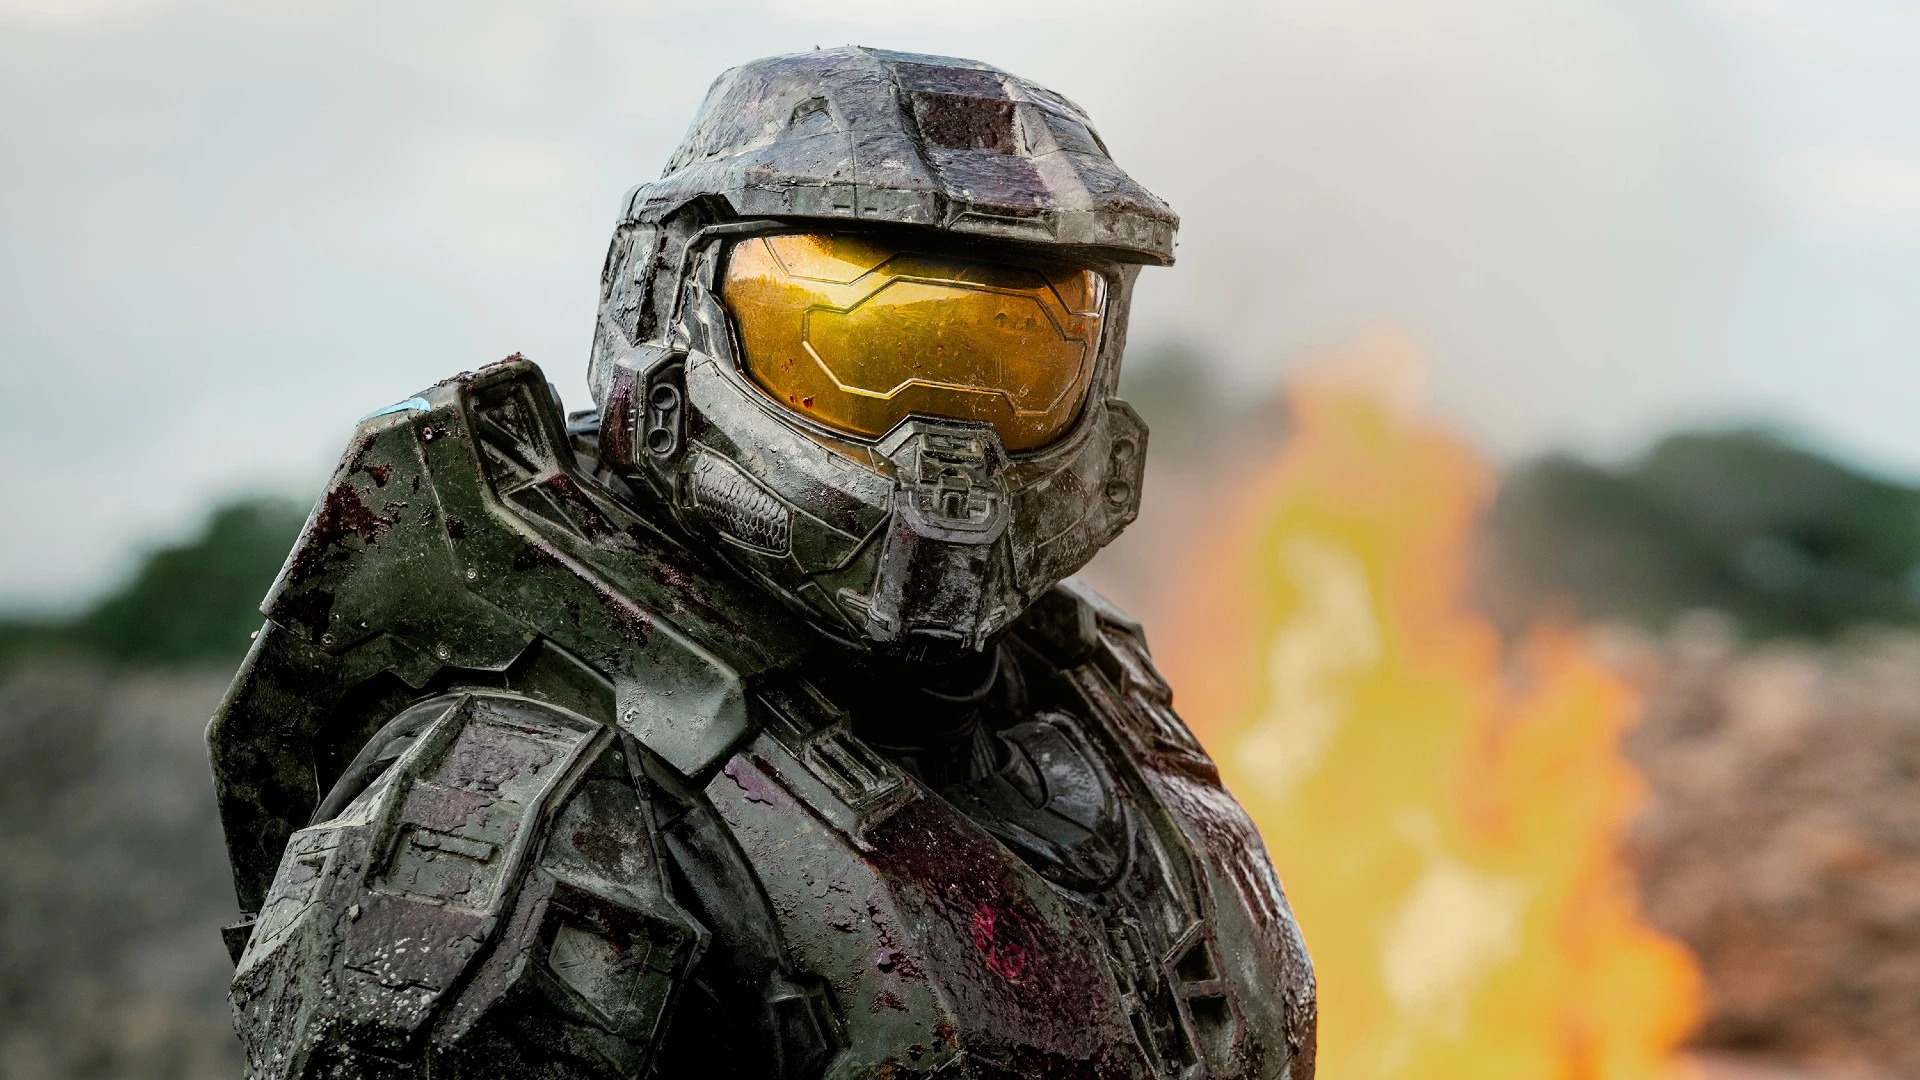 Halo TV series episode 4 release date and time